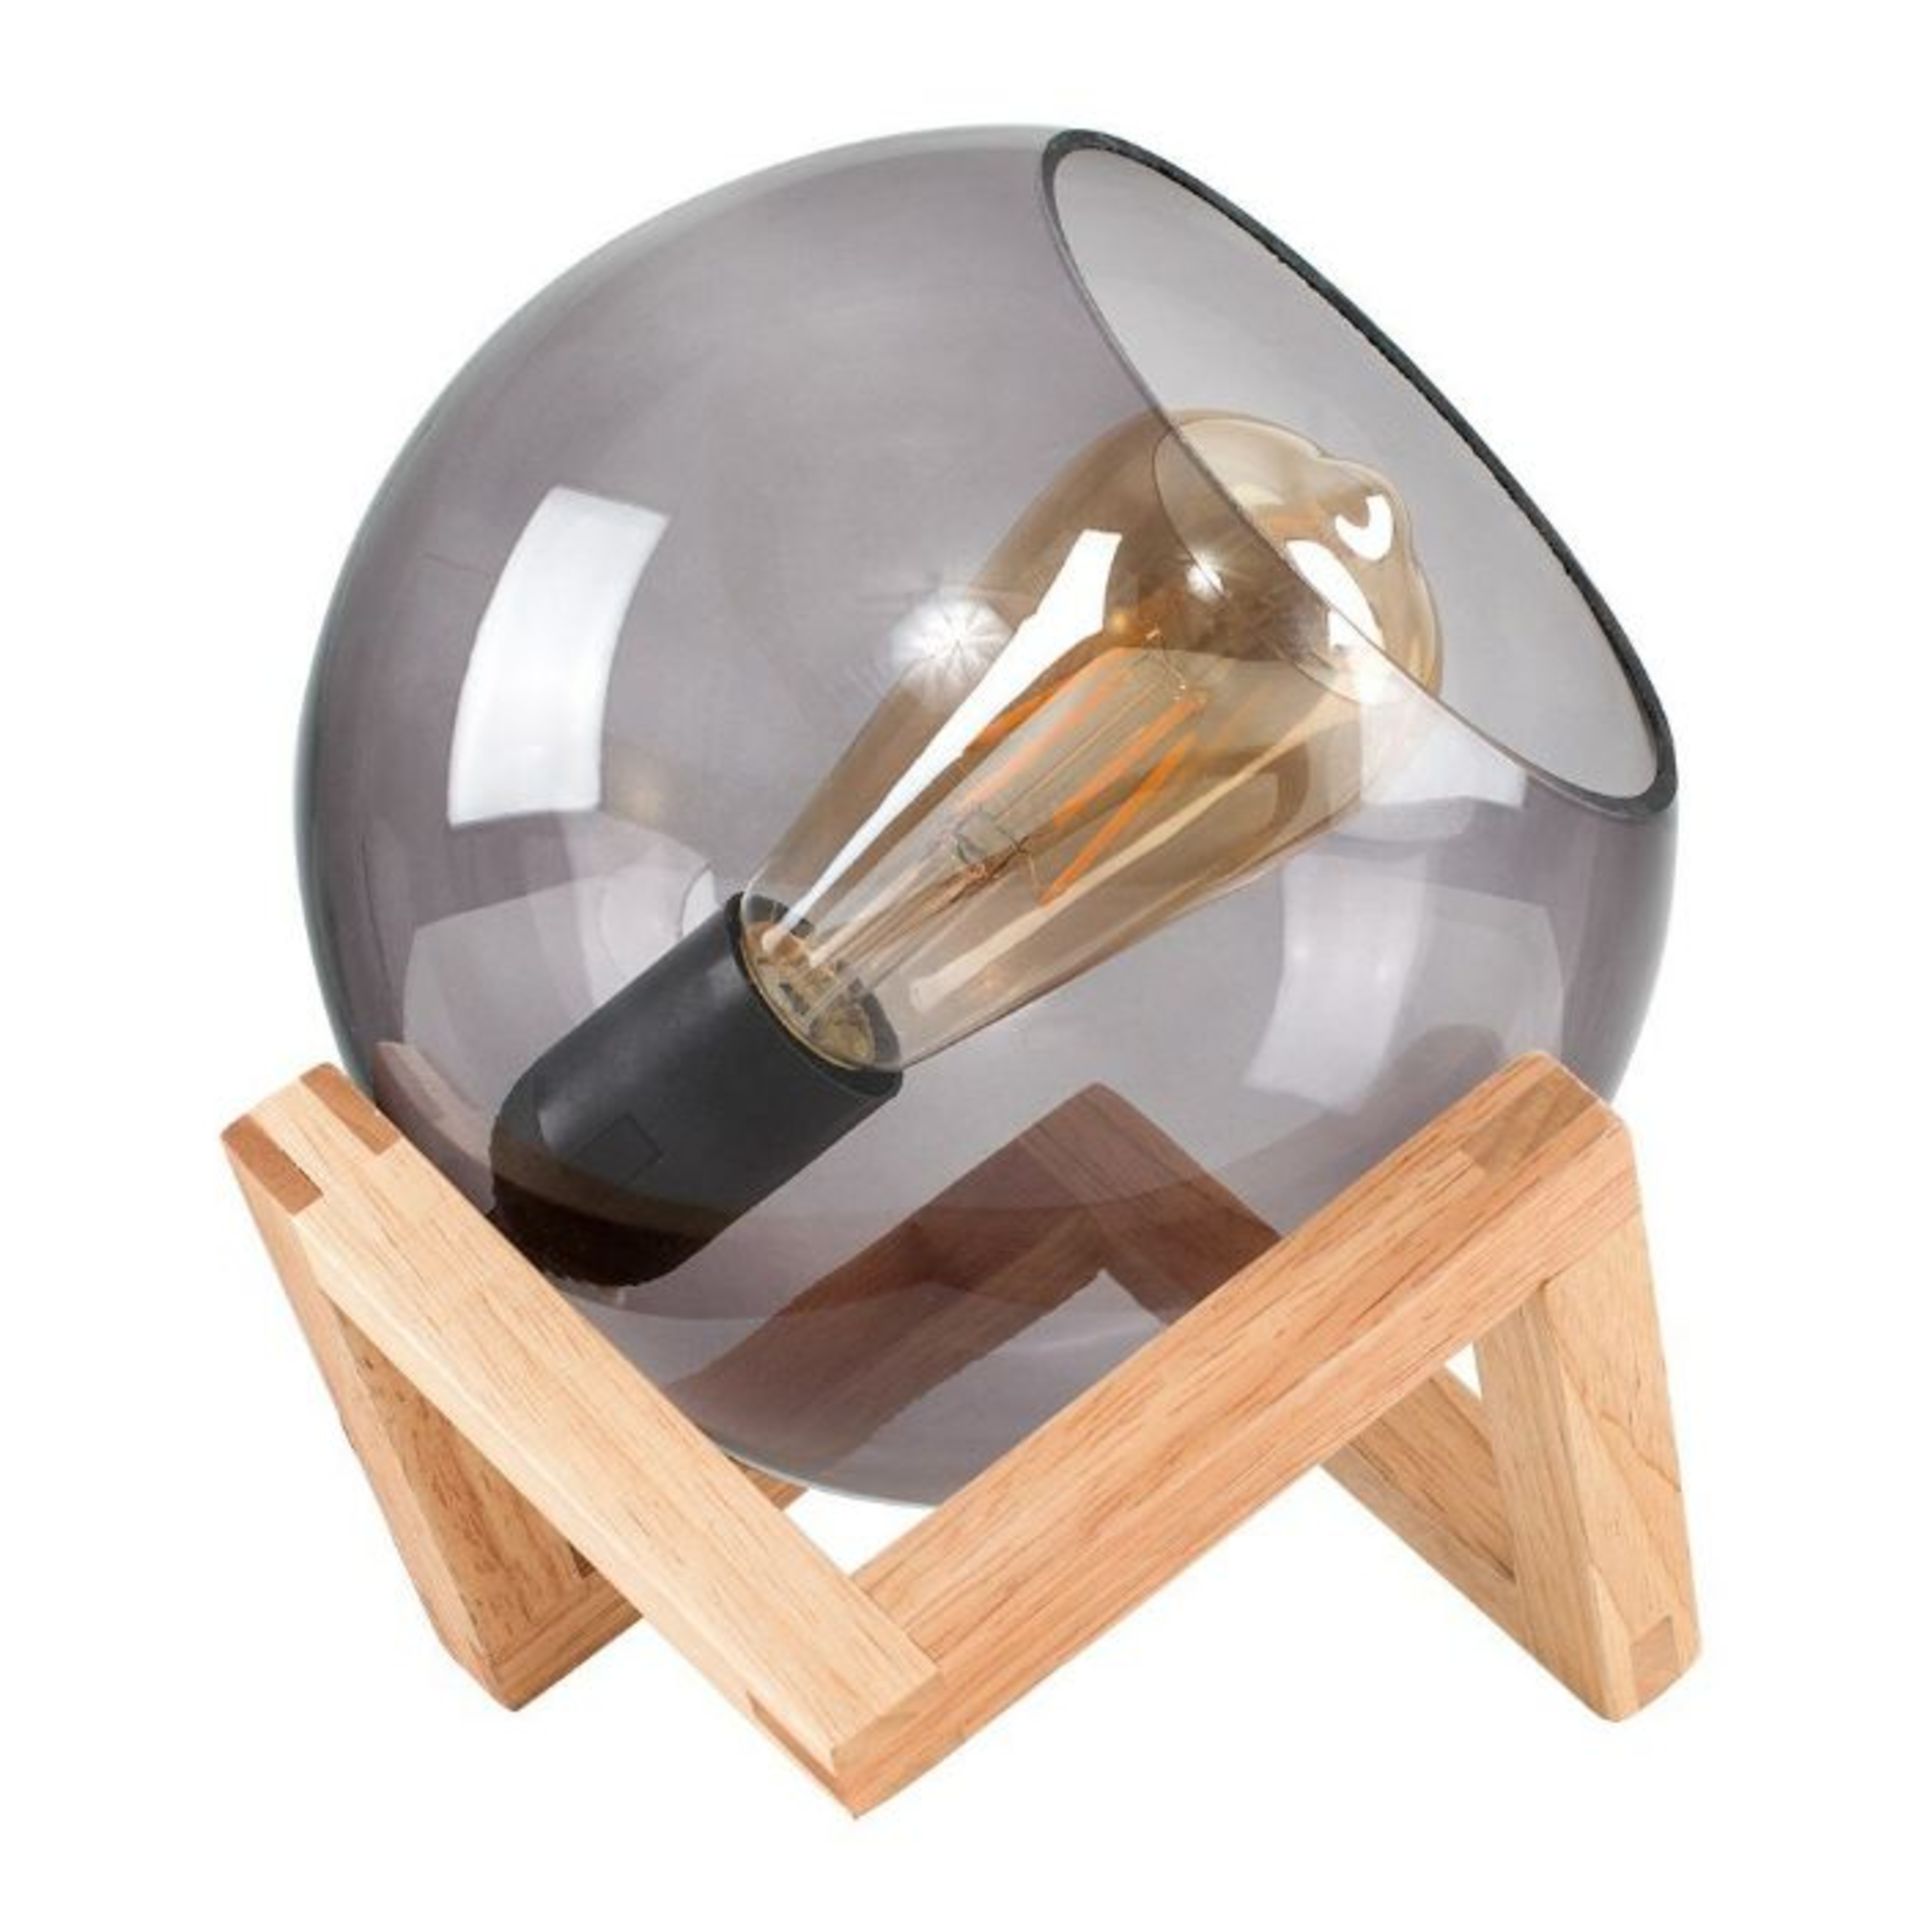 17 Stories, Mikaeel Glass Globe 24cm Table Lamp (SOLID WOOD BASE & SMOKED GLASS SHADE) - RRP £38.